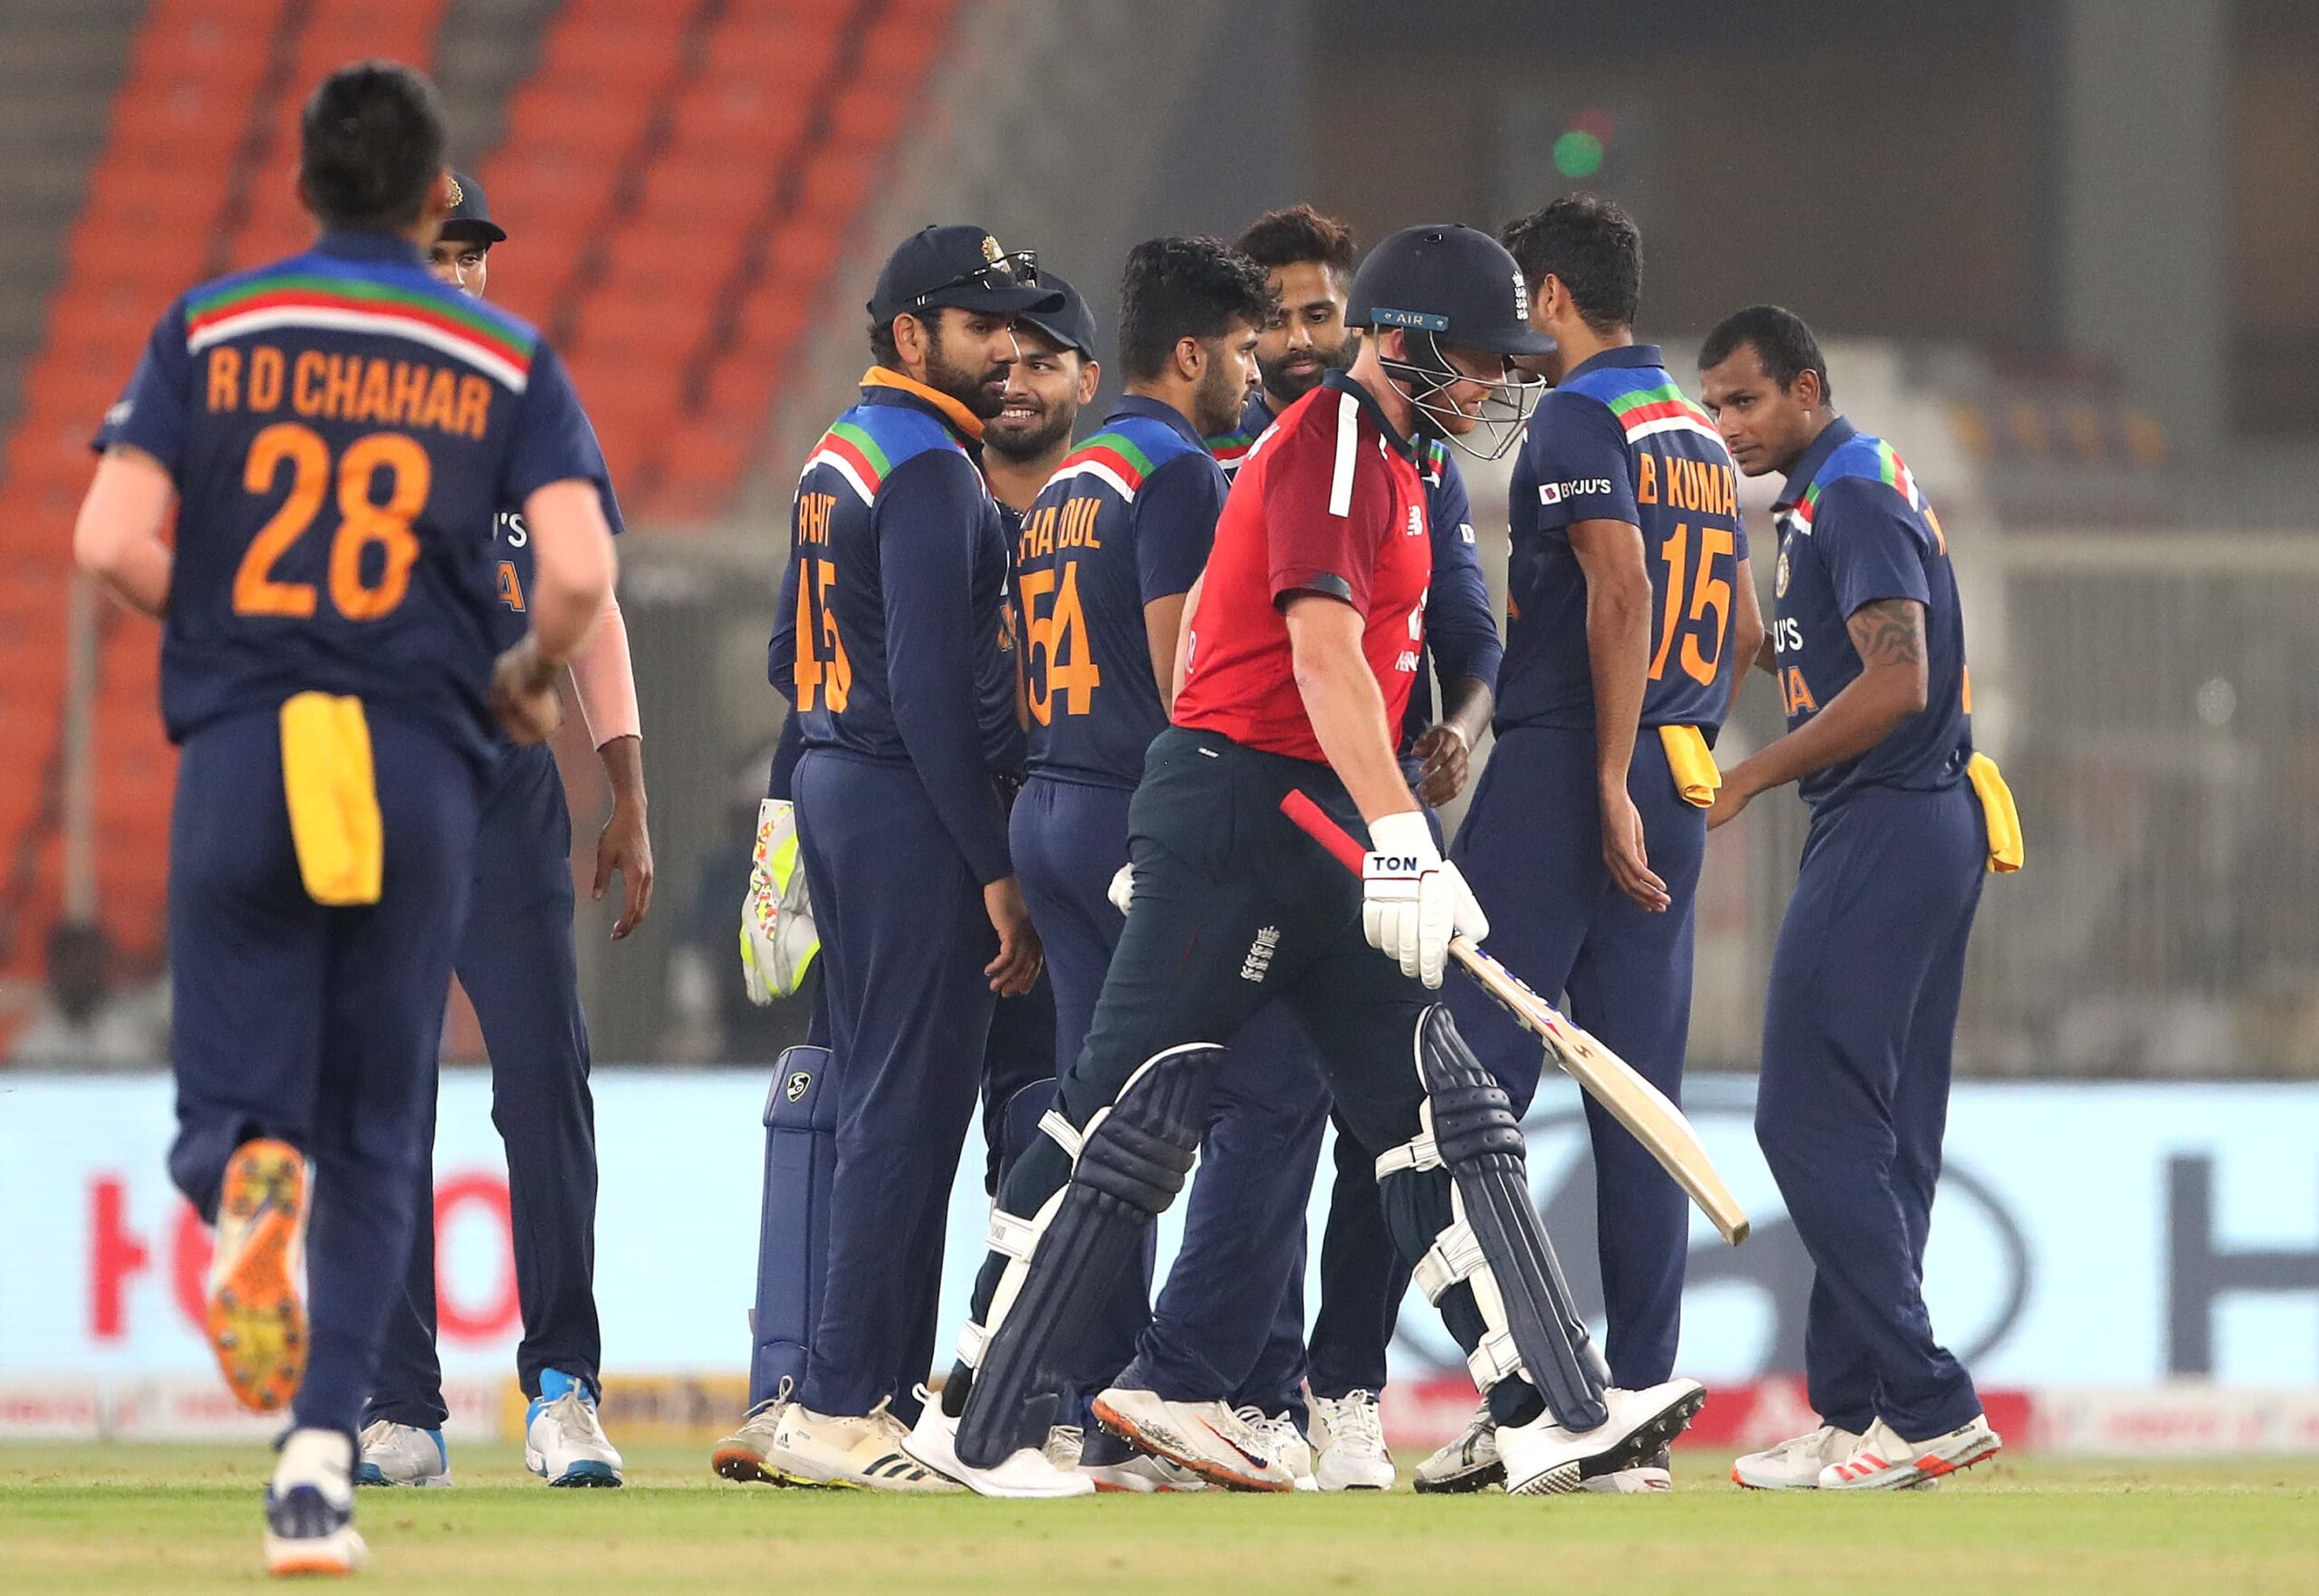 England collapse to T20 sequence defeat to India